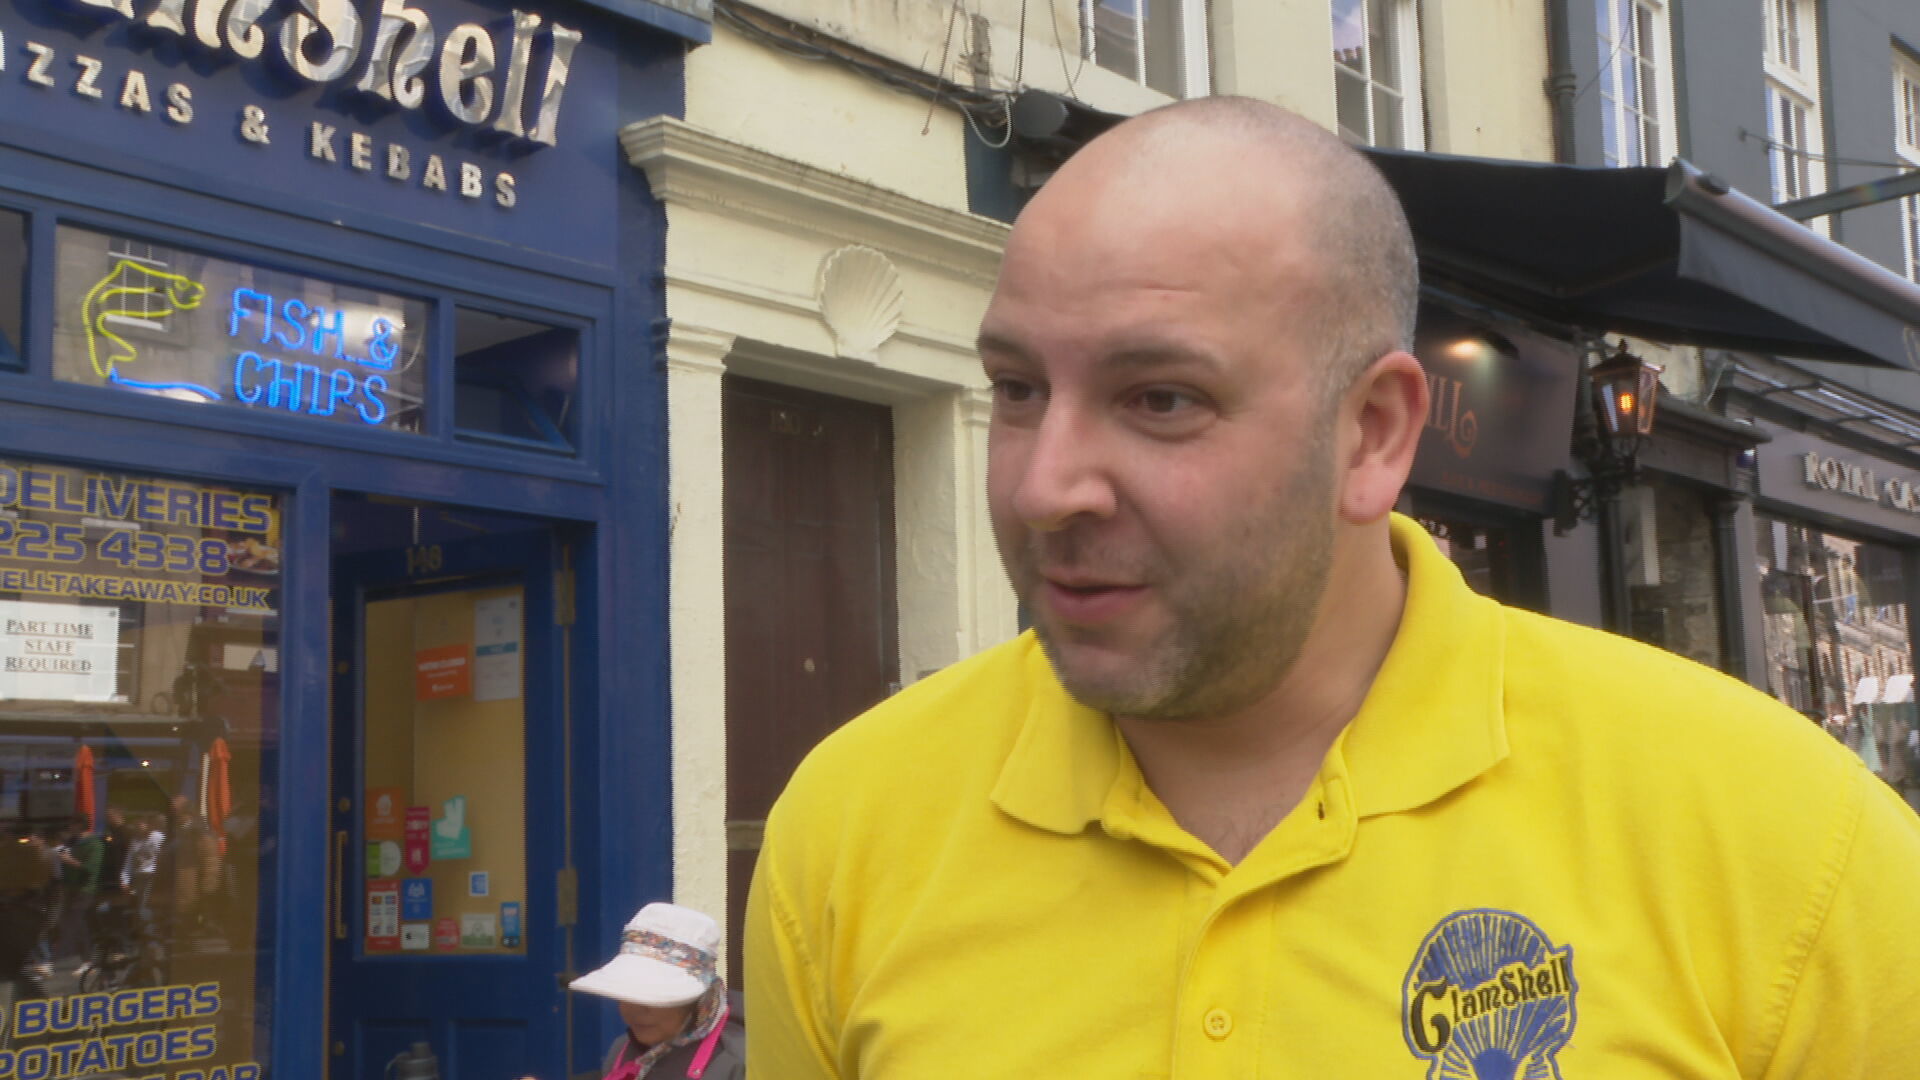 Massimo Andreucci, owner of the Clam Shell Chip Shop on the Royal Mile